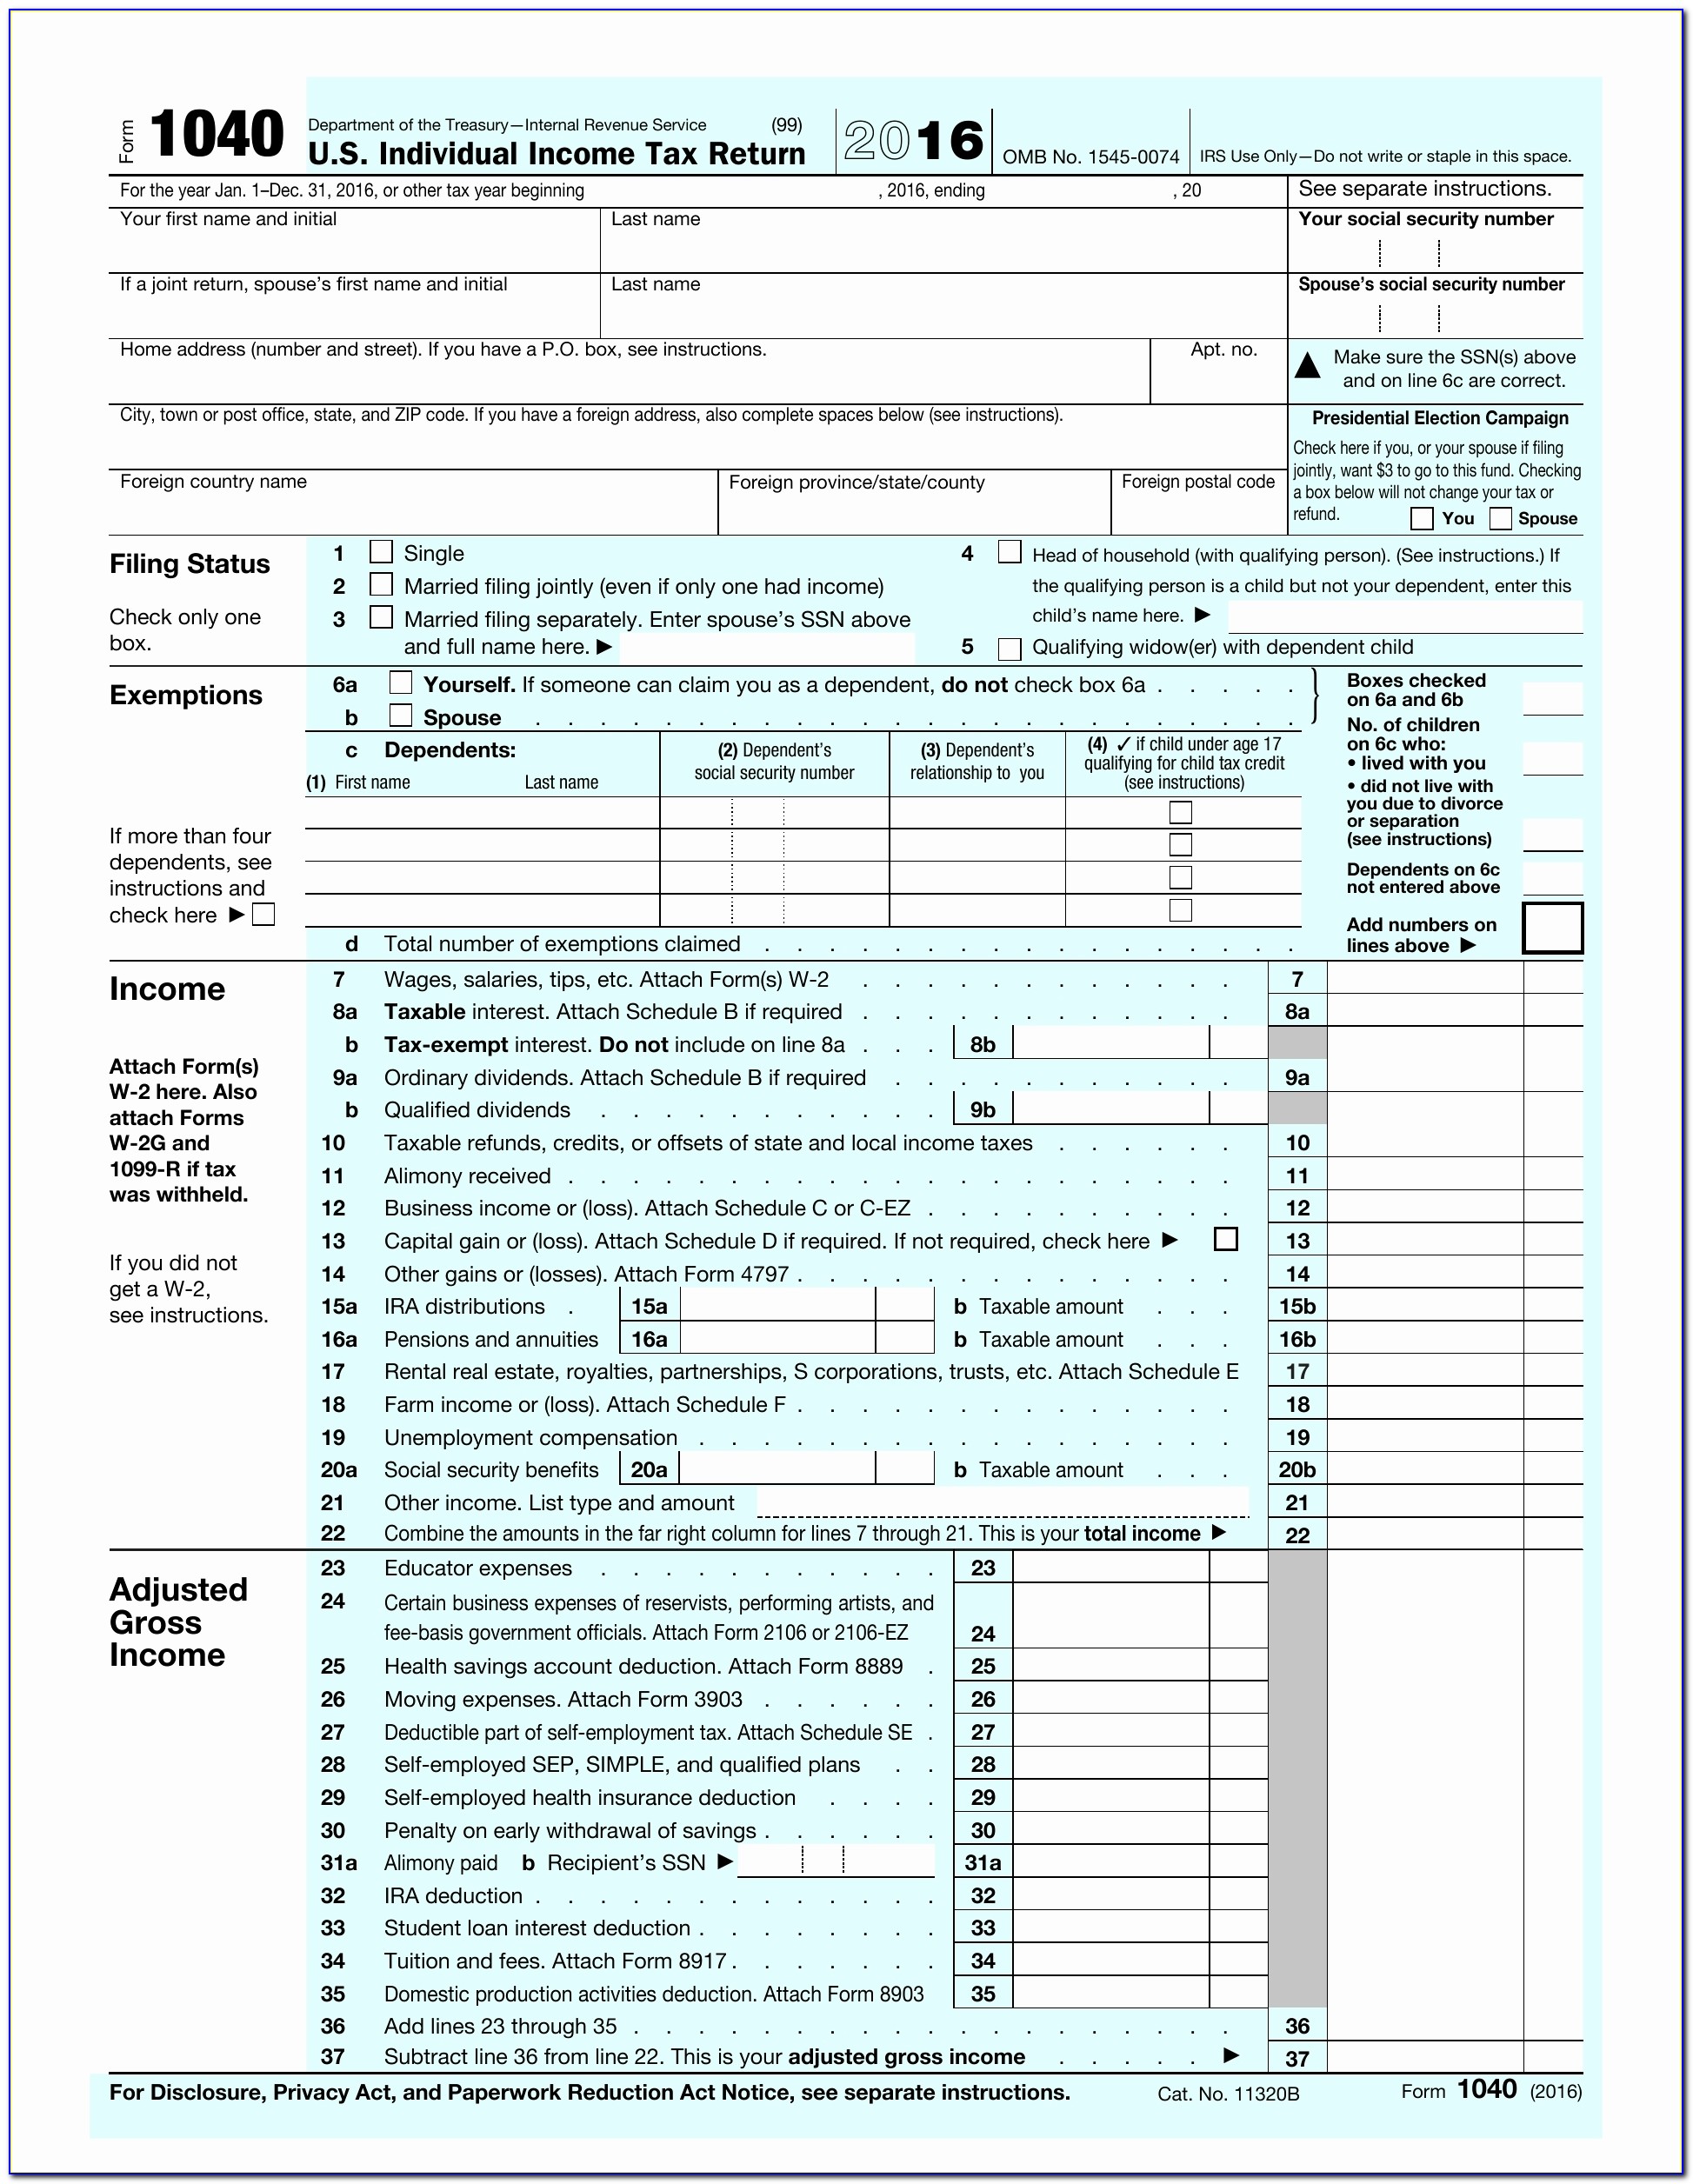 Form Ssa 1099 Fresh Social Security Benefits Statement Form Ssa 1099 Gallery Form